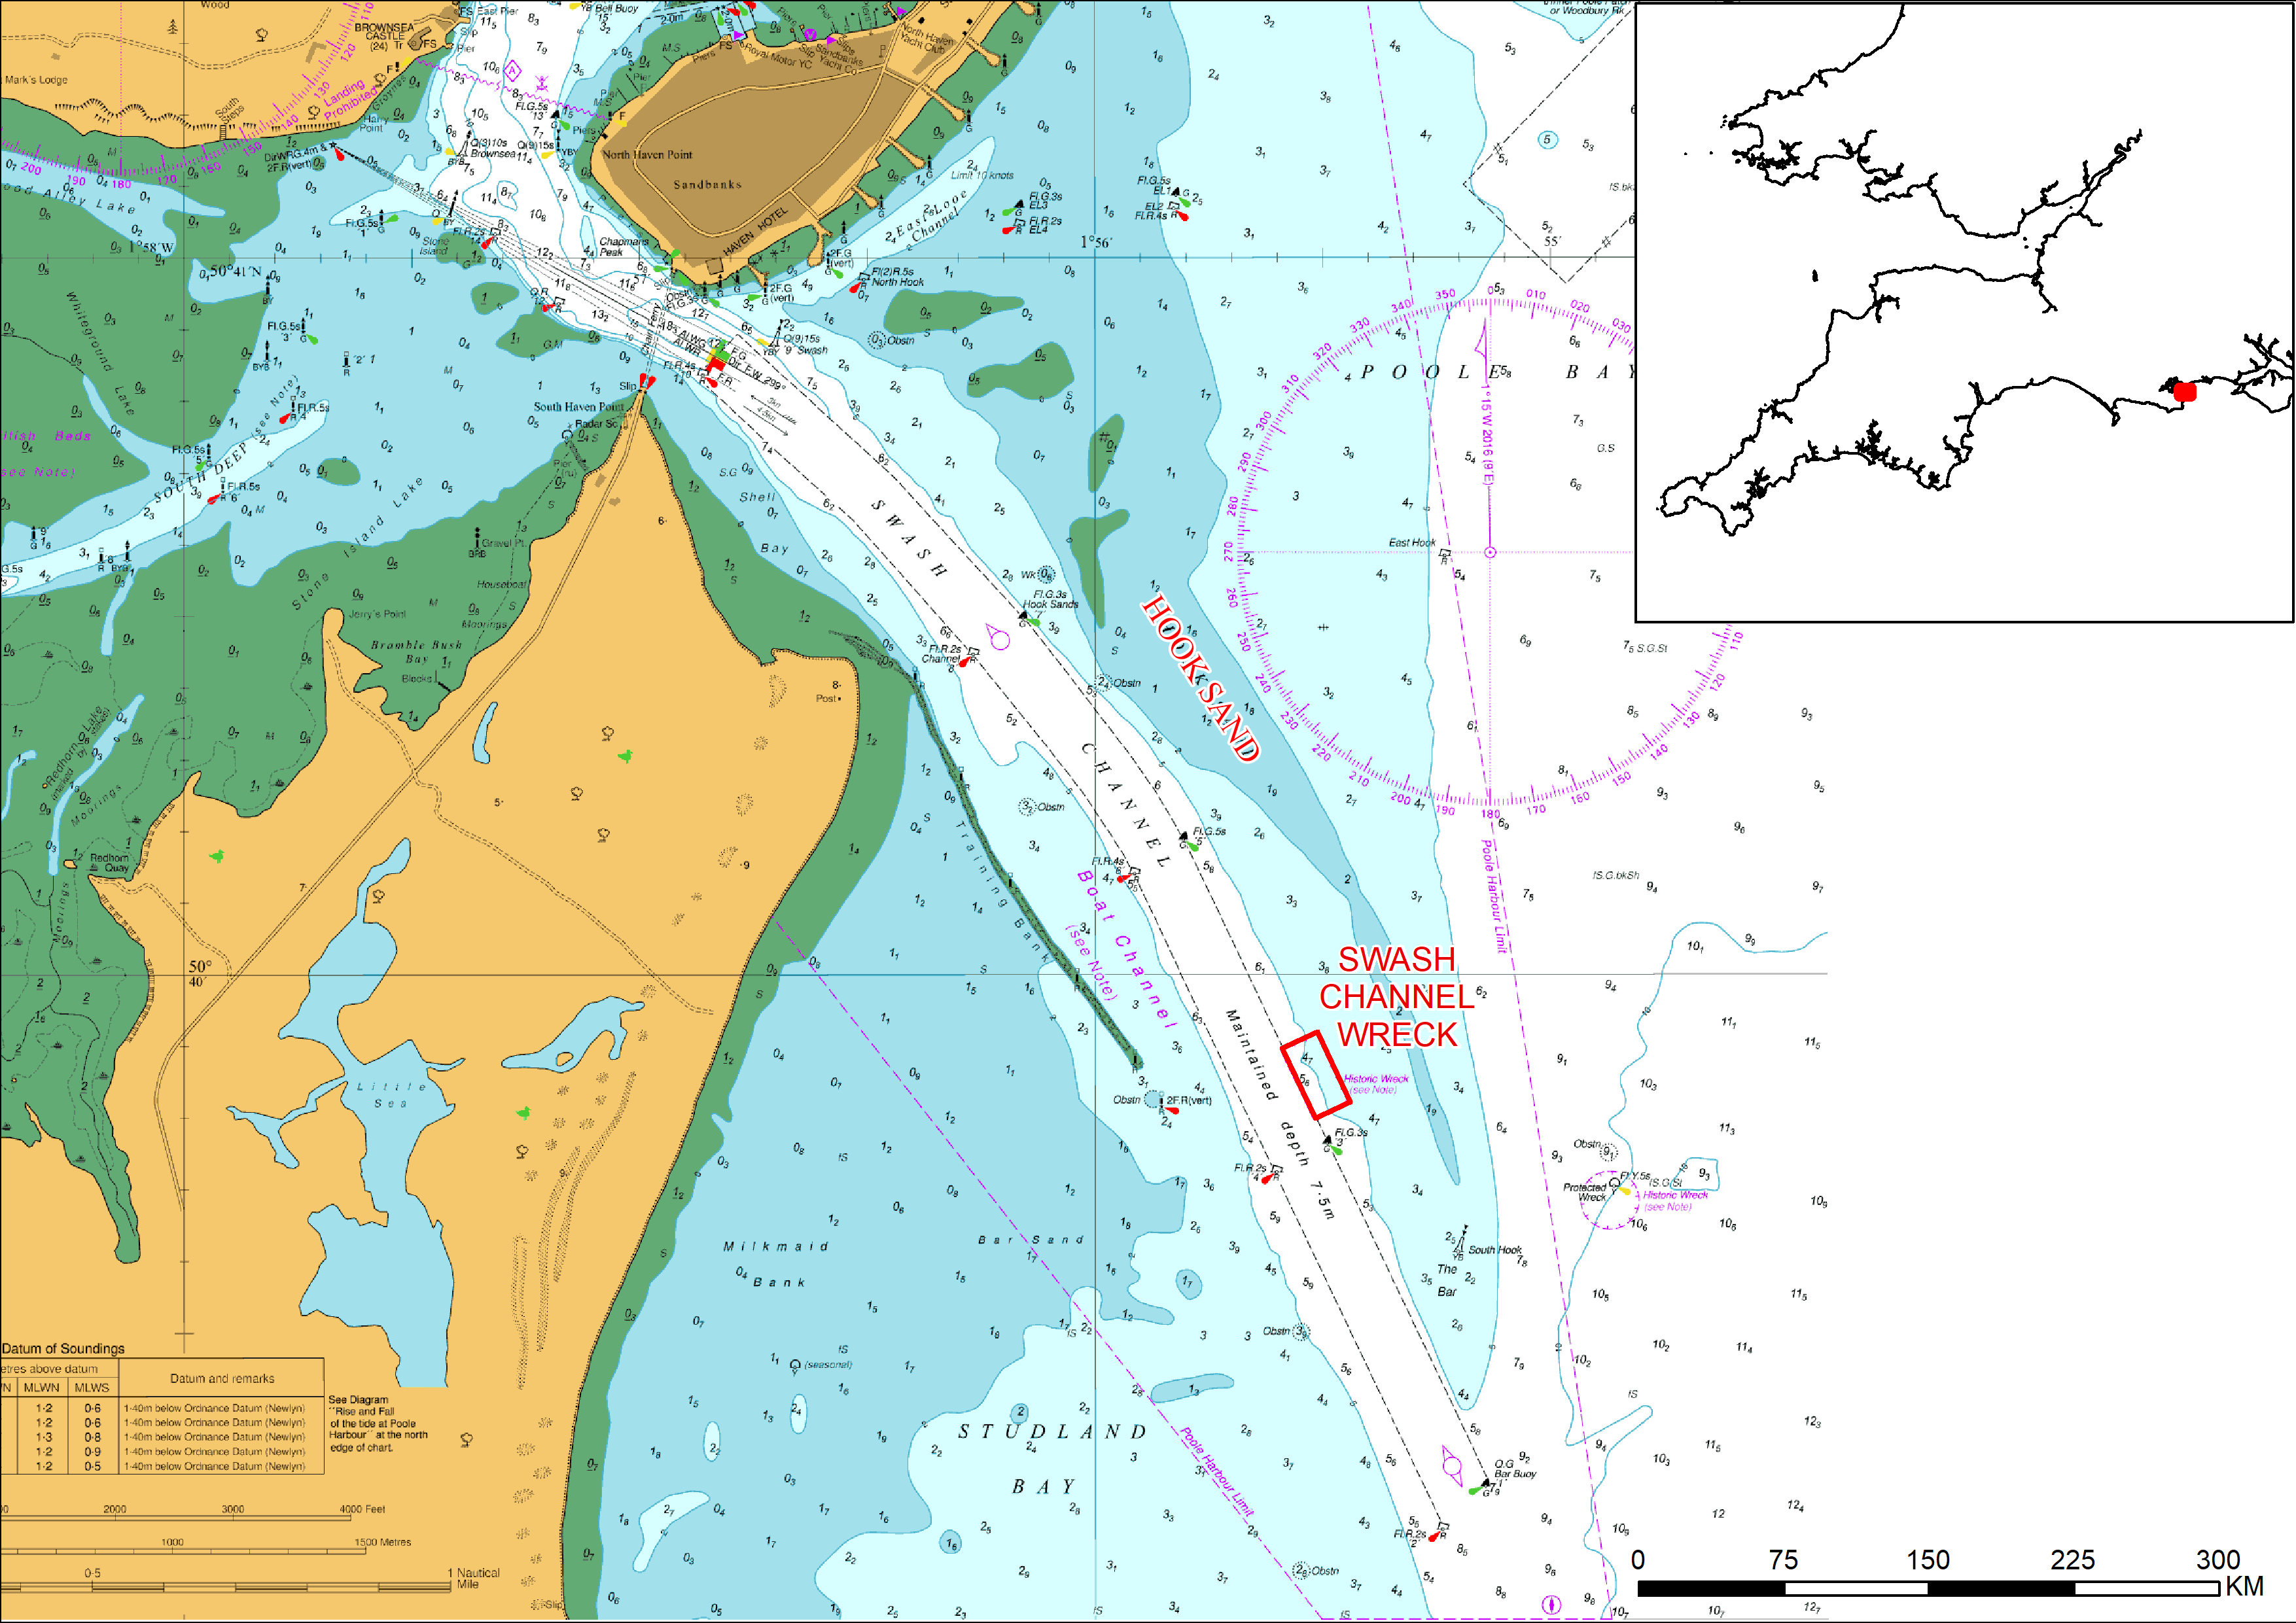 Location of the Swash Channel Wreck